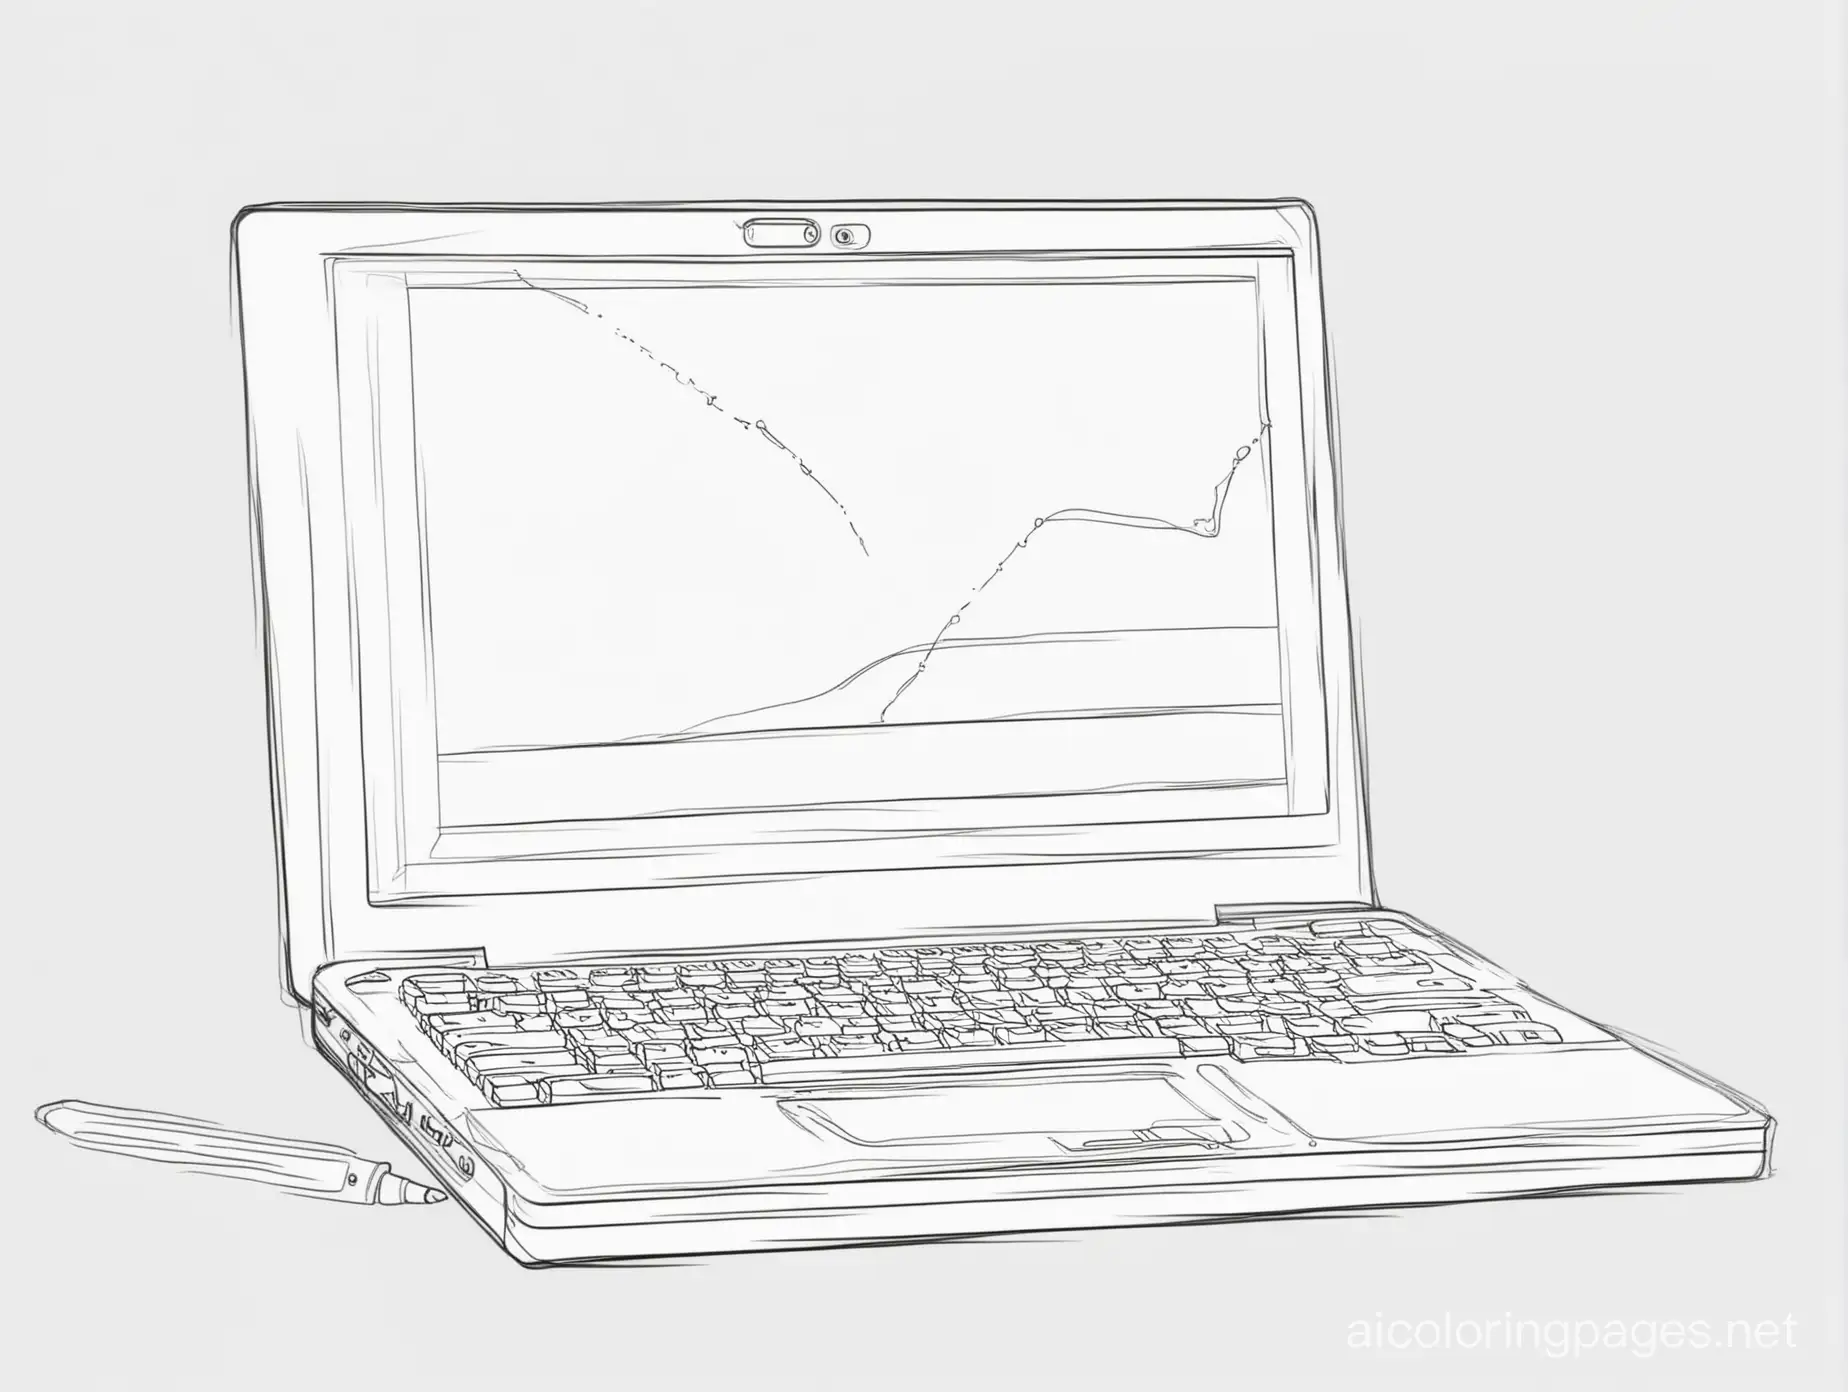 computer notebook, Coloring Page, black and white, line art, white background, Simplicity, Ample White Space. The background of the coloring page is plain white to make it easy for young children to color within the lines. The outlines of all the subjects are easy to distinguish, making it simple for kids to color without too much difficulty